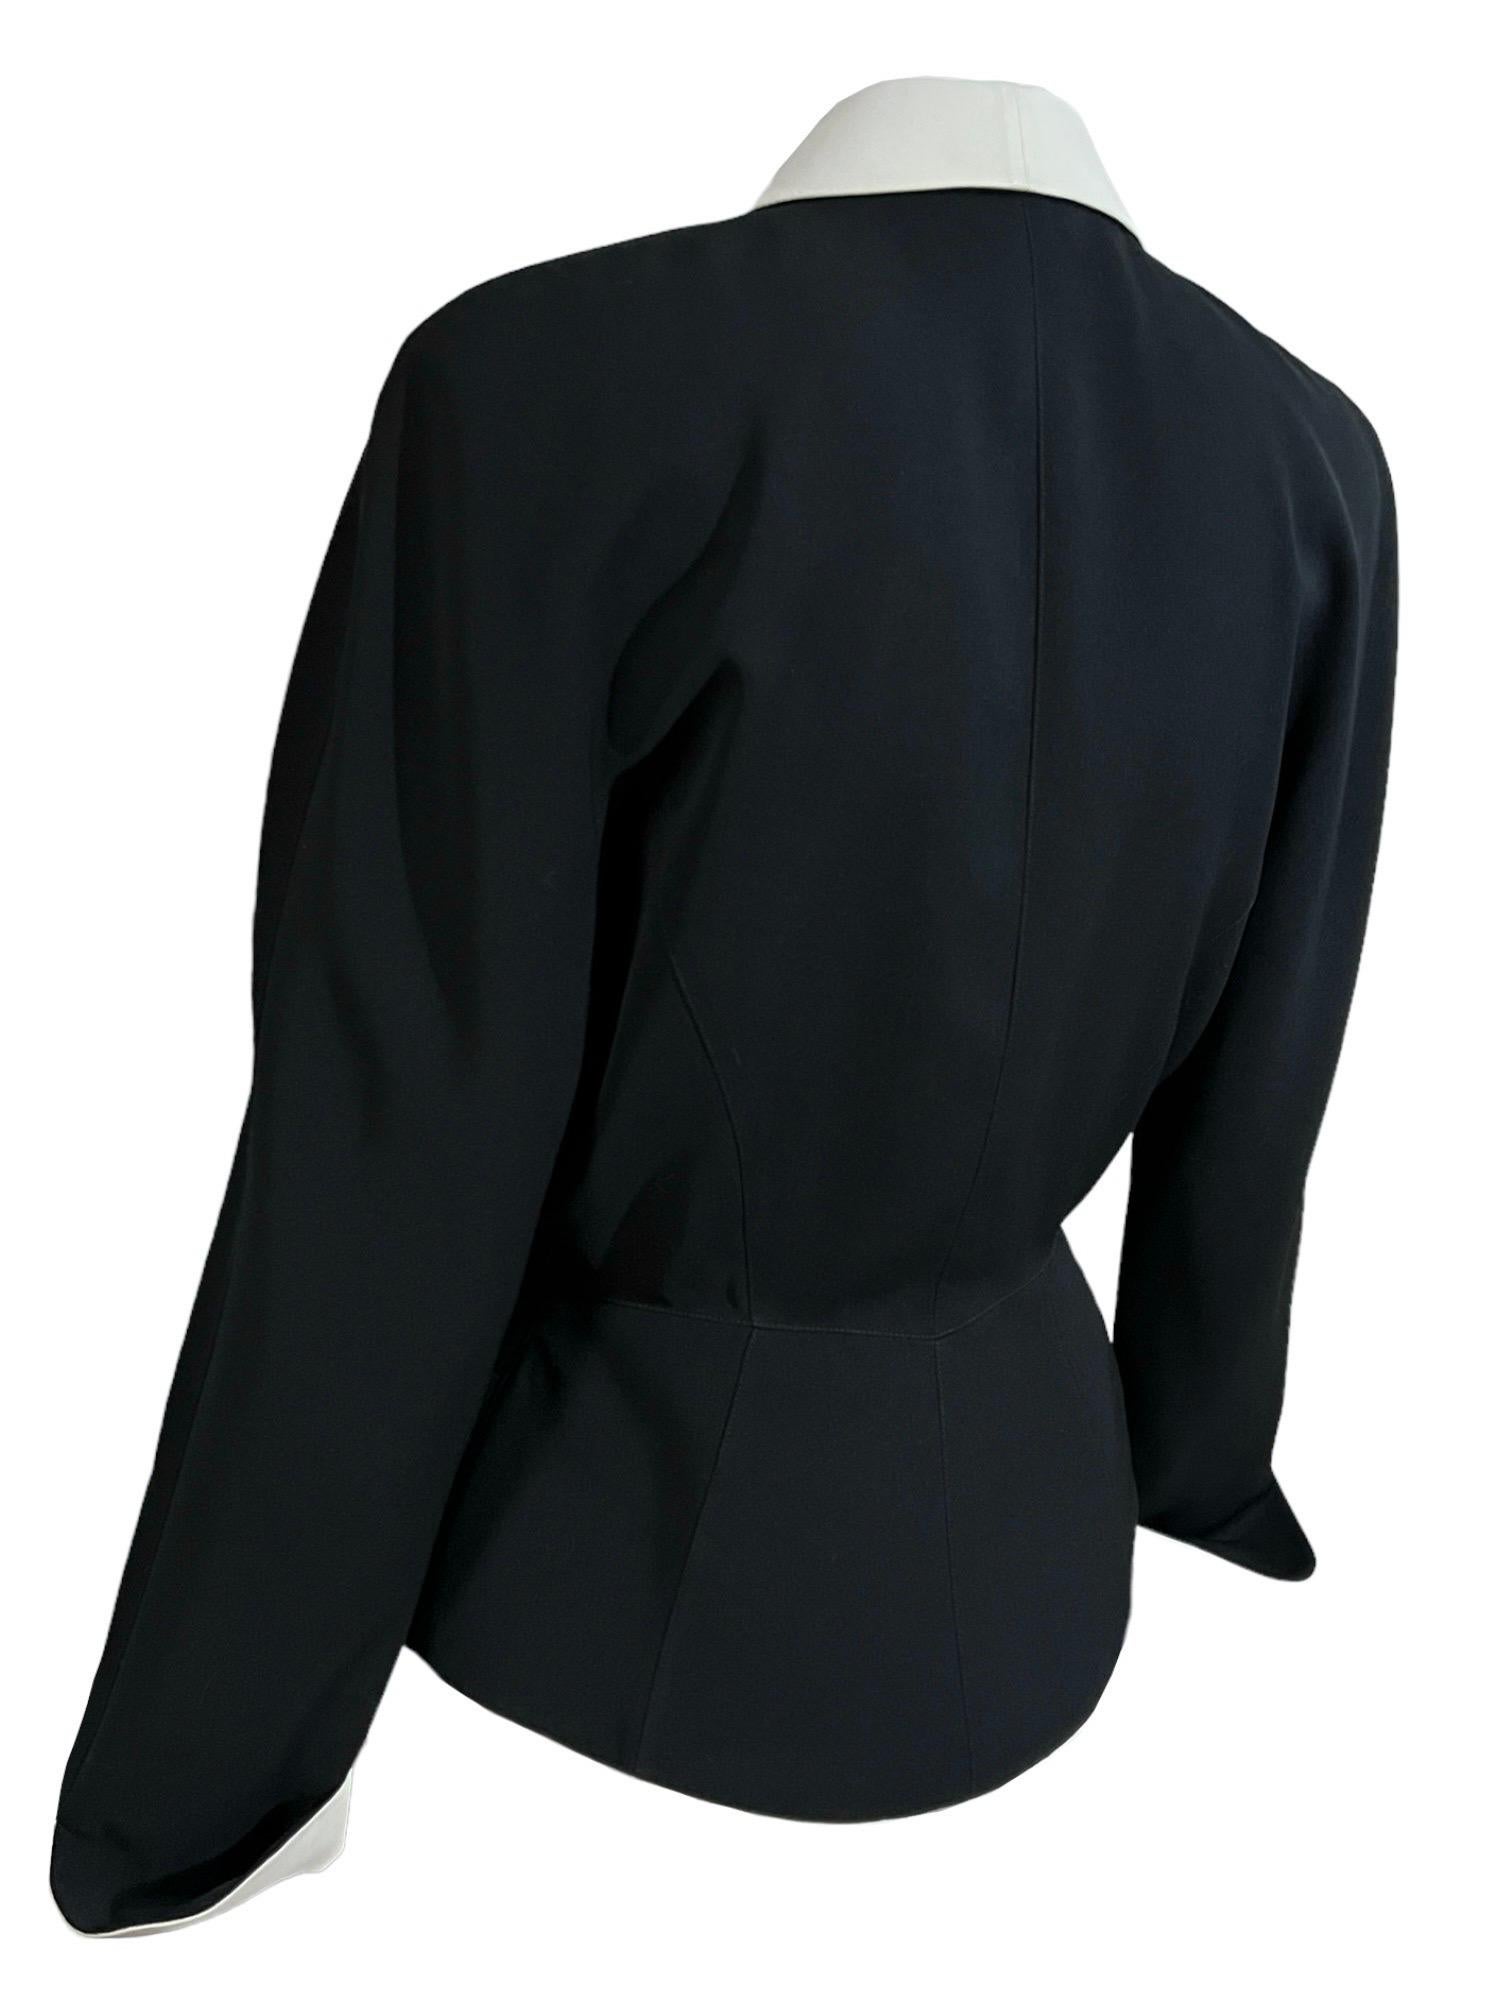 S/S 1992 Thierry Mugler Black Runway Jacket Dramatic White Collar For Sale 3